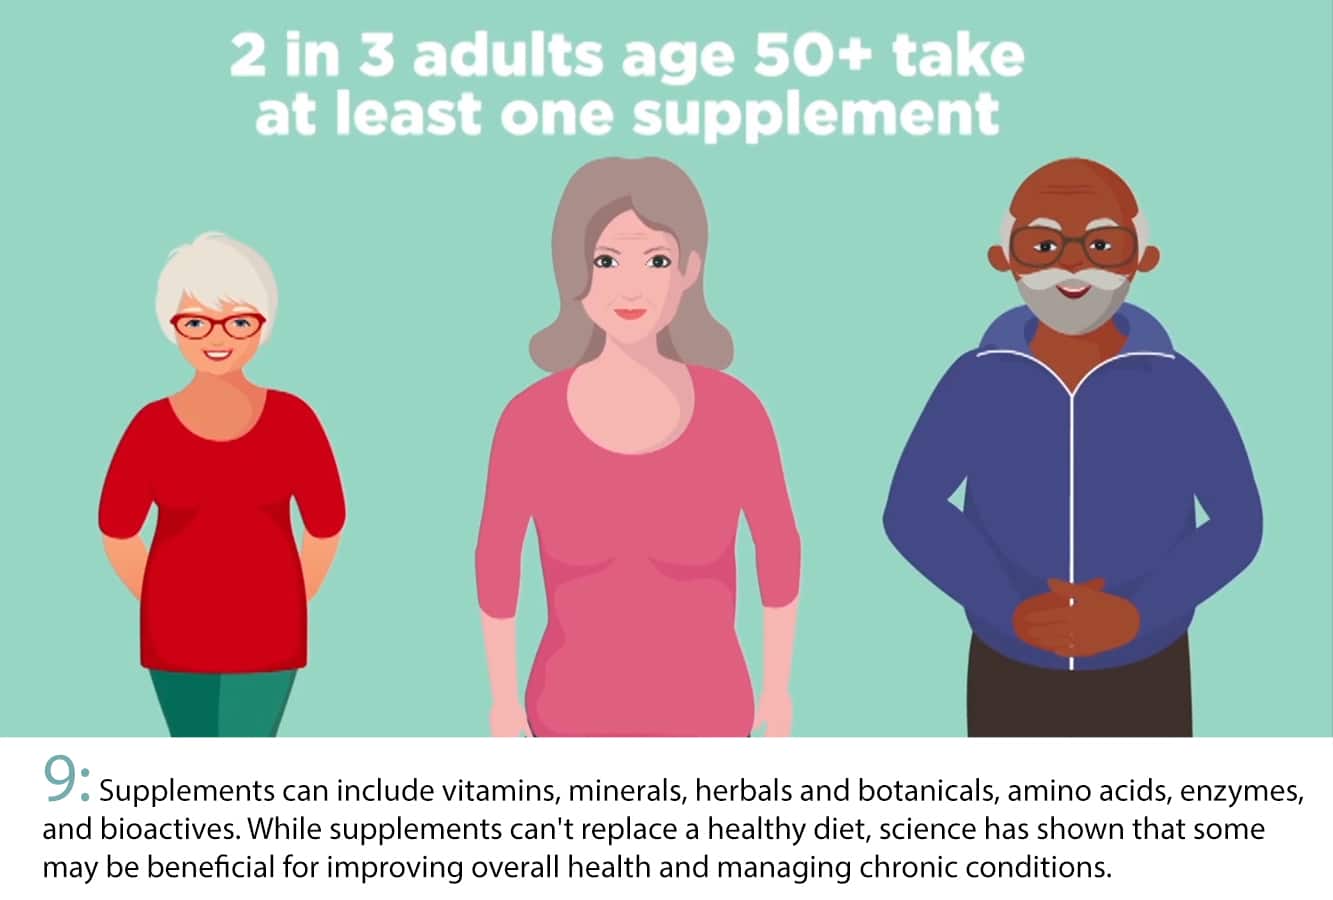 Cartoon elderly people with text "2 in 3 adults over 50 take at least 1 supplement."